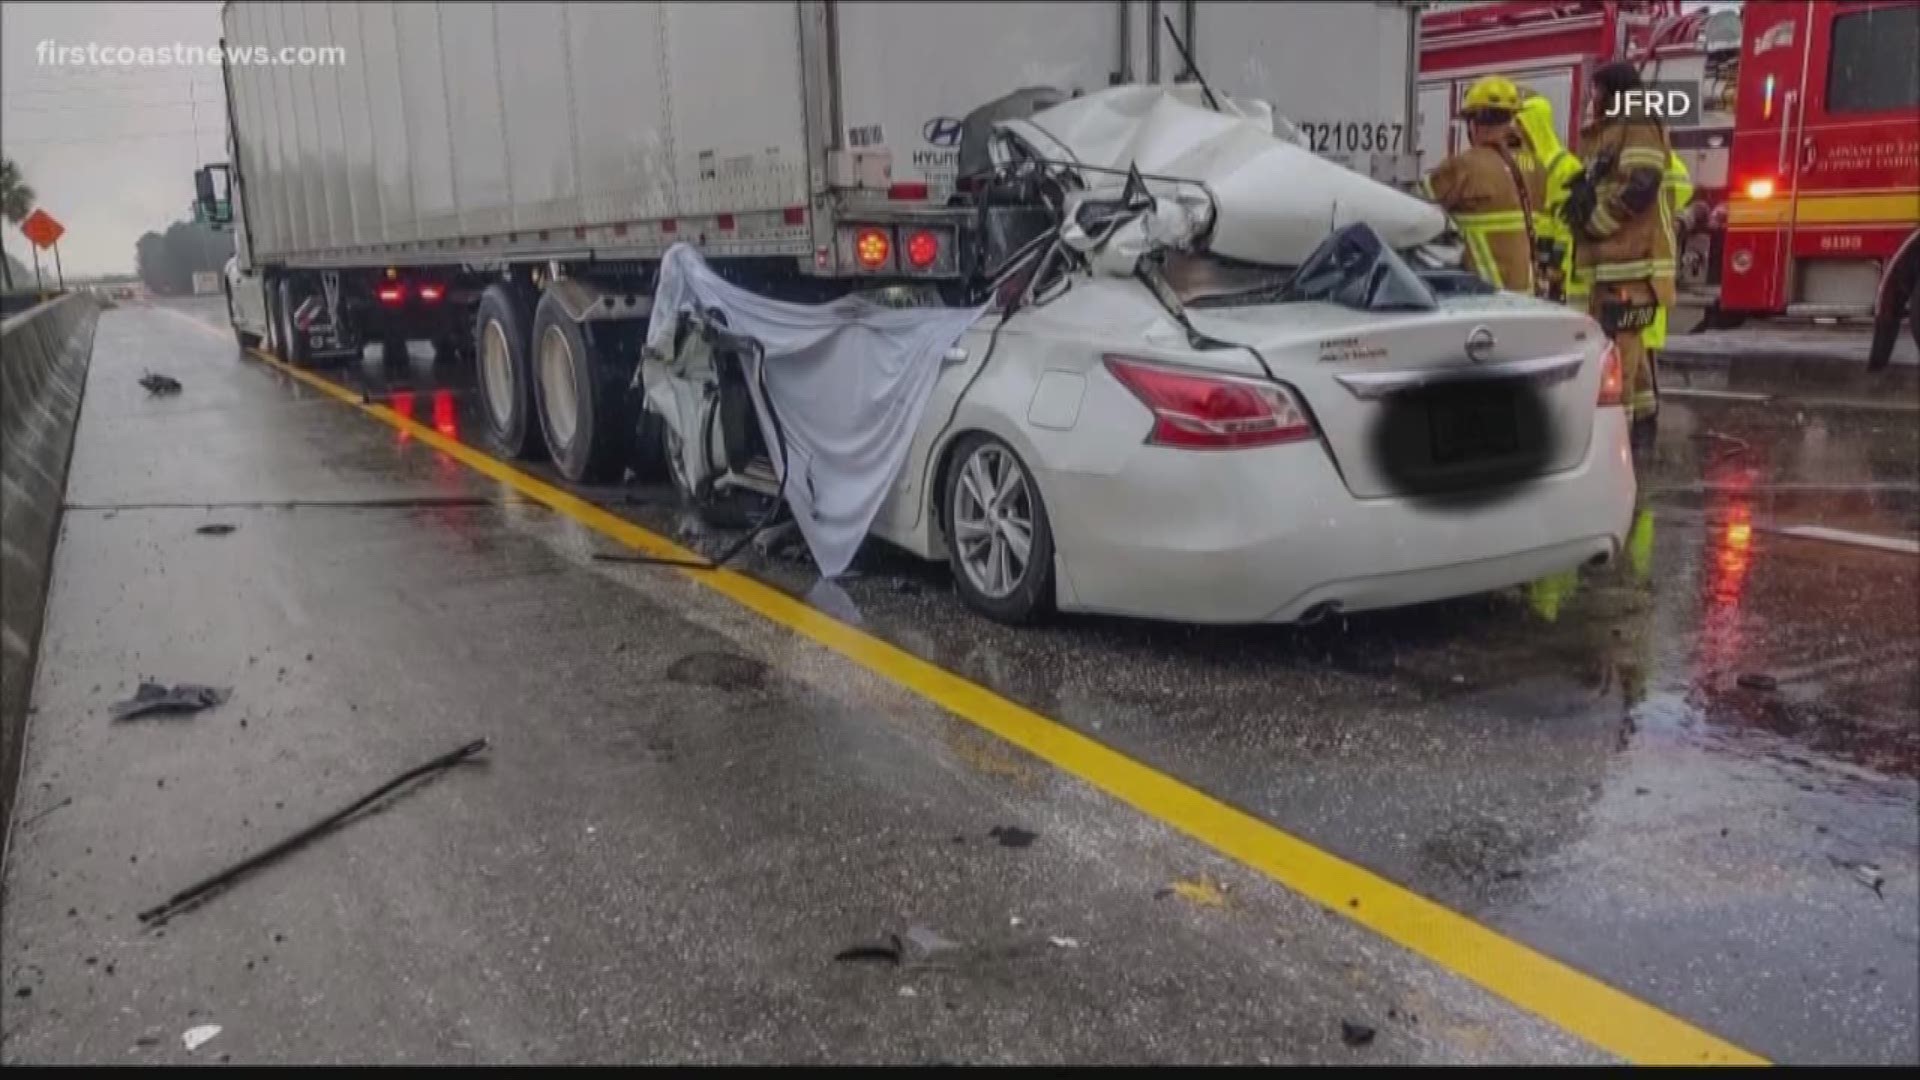 Ashley Nicole Galan, 30, of Keystone Heights, was identified as the victim of Tuesday's fatal crash involving a semi-truck on I-295 near Duval Road, FHP said.